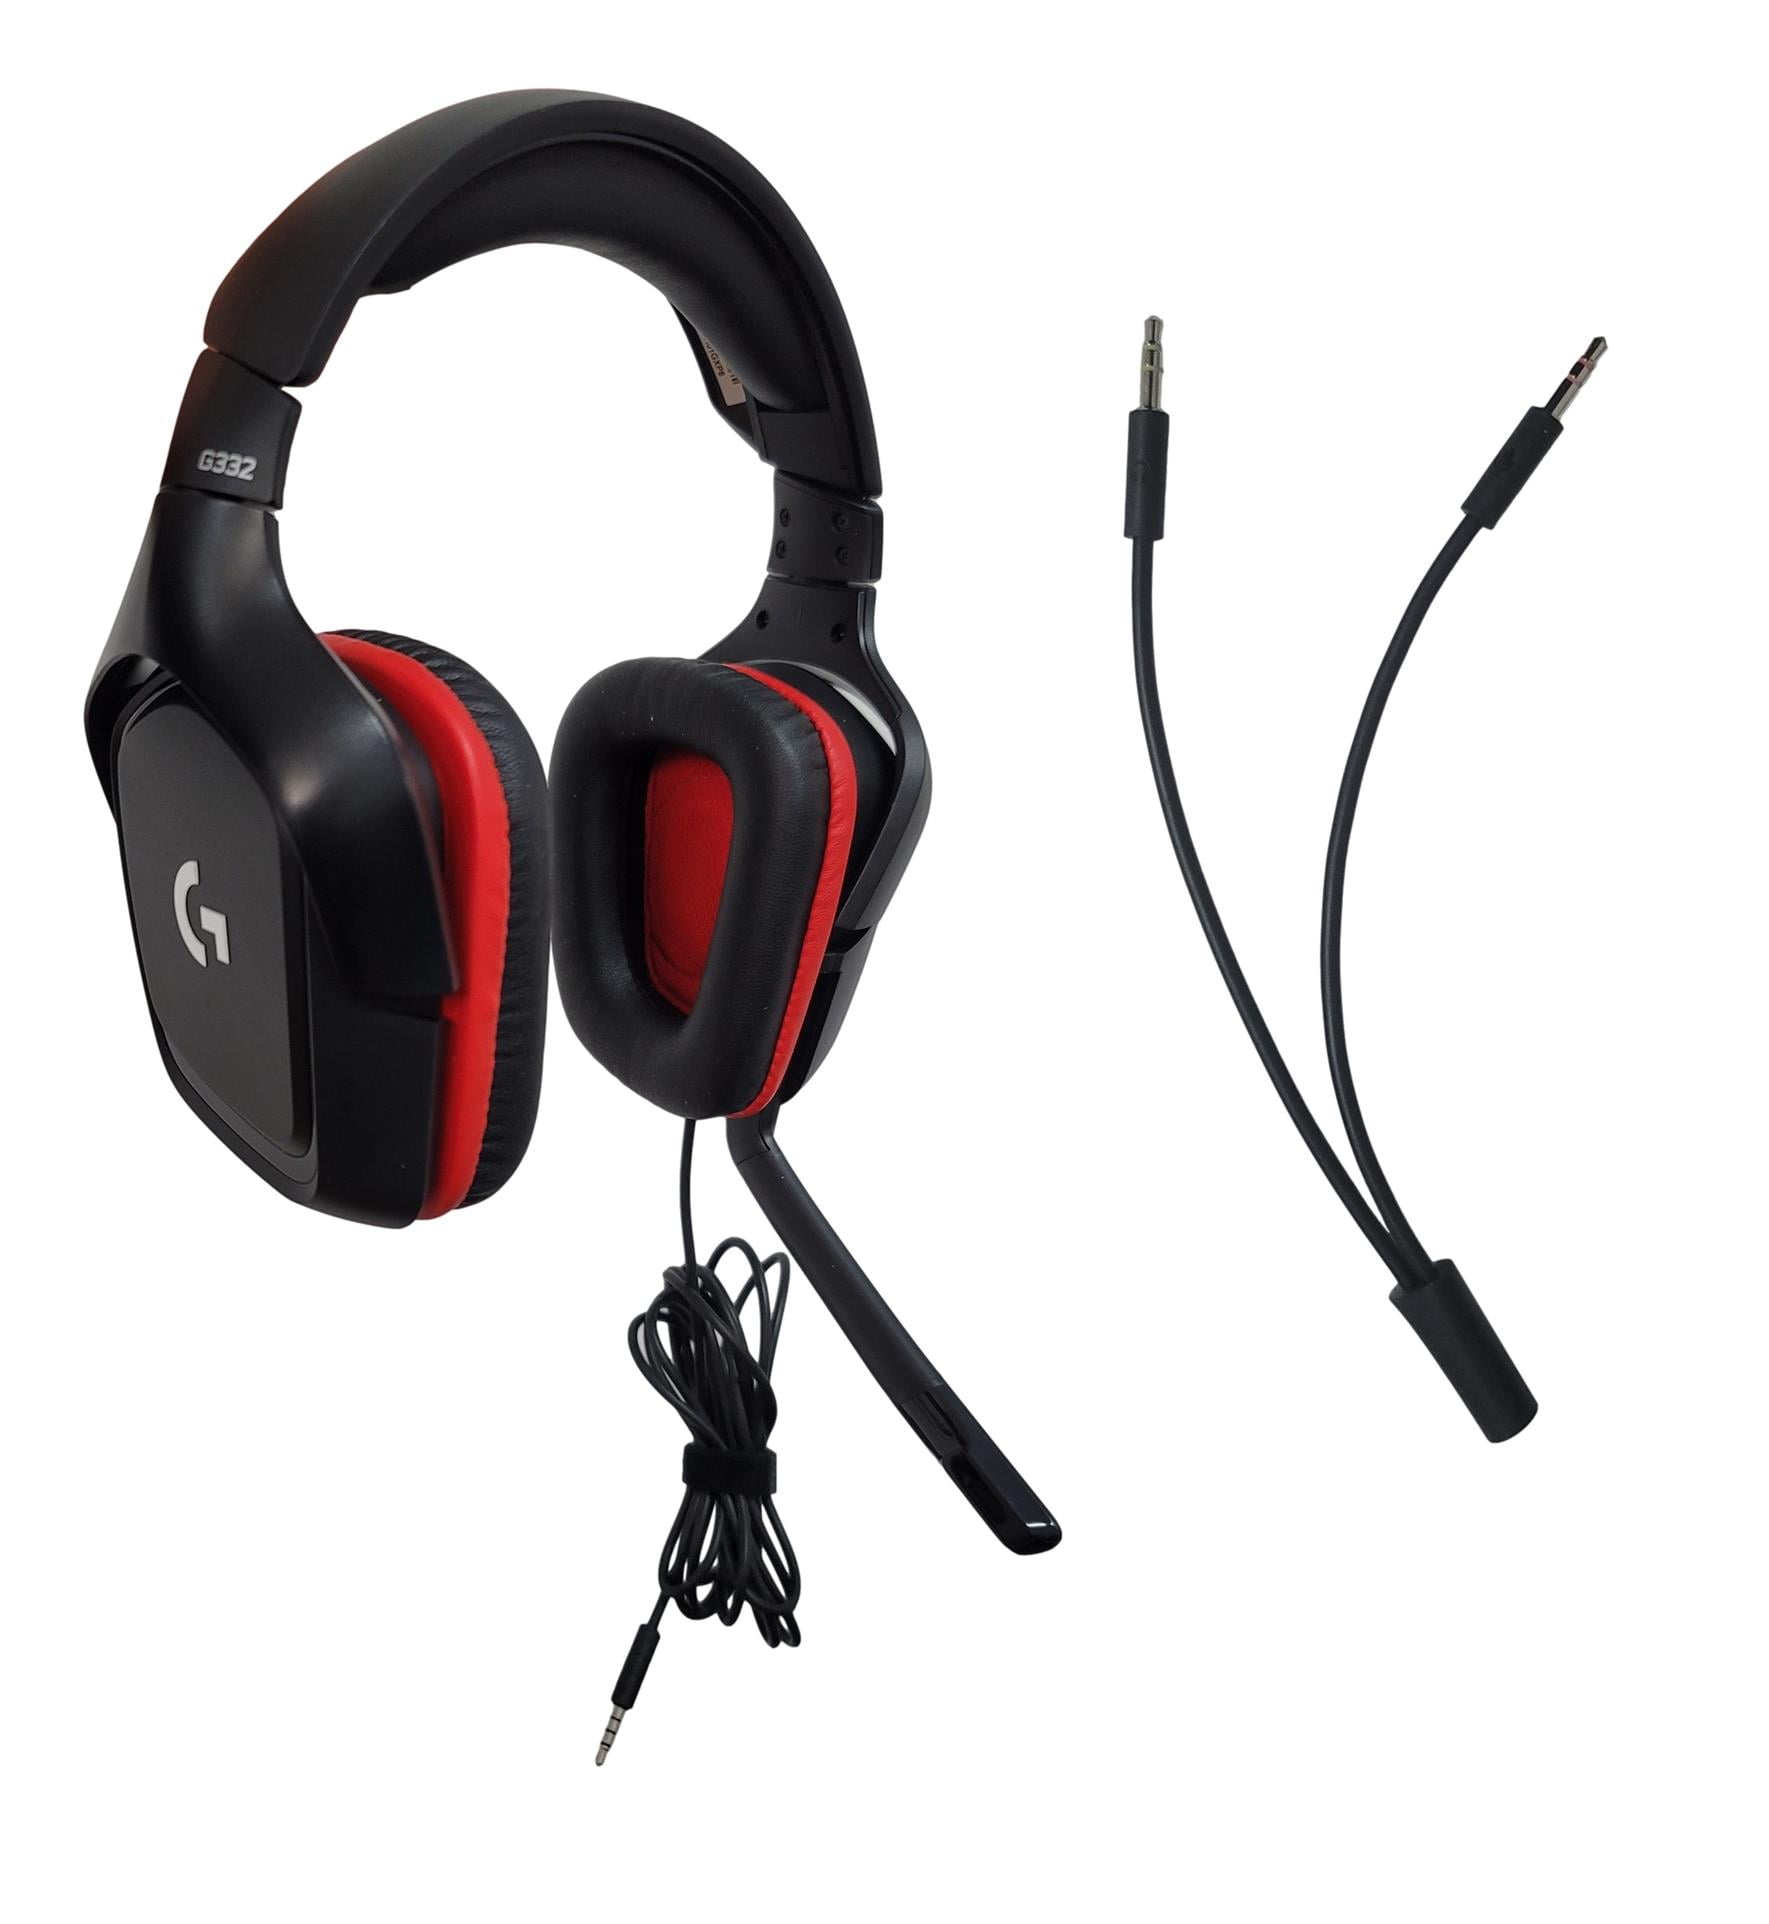 udkast unse kompromis Logitech G332 Stereo Gaming Headset for PC, Mac, PS4, PS5, Xbox One,  Smartphones and Nintendo Switch - Red/Black - 981-000755 [Non-Retail  Packaging] - Walmart.com